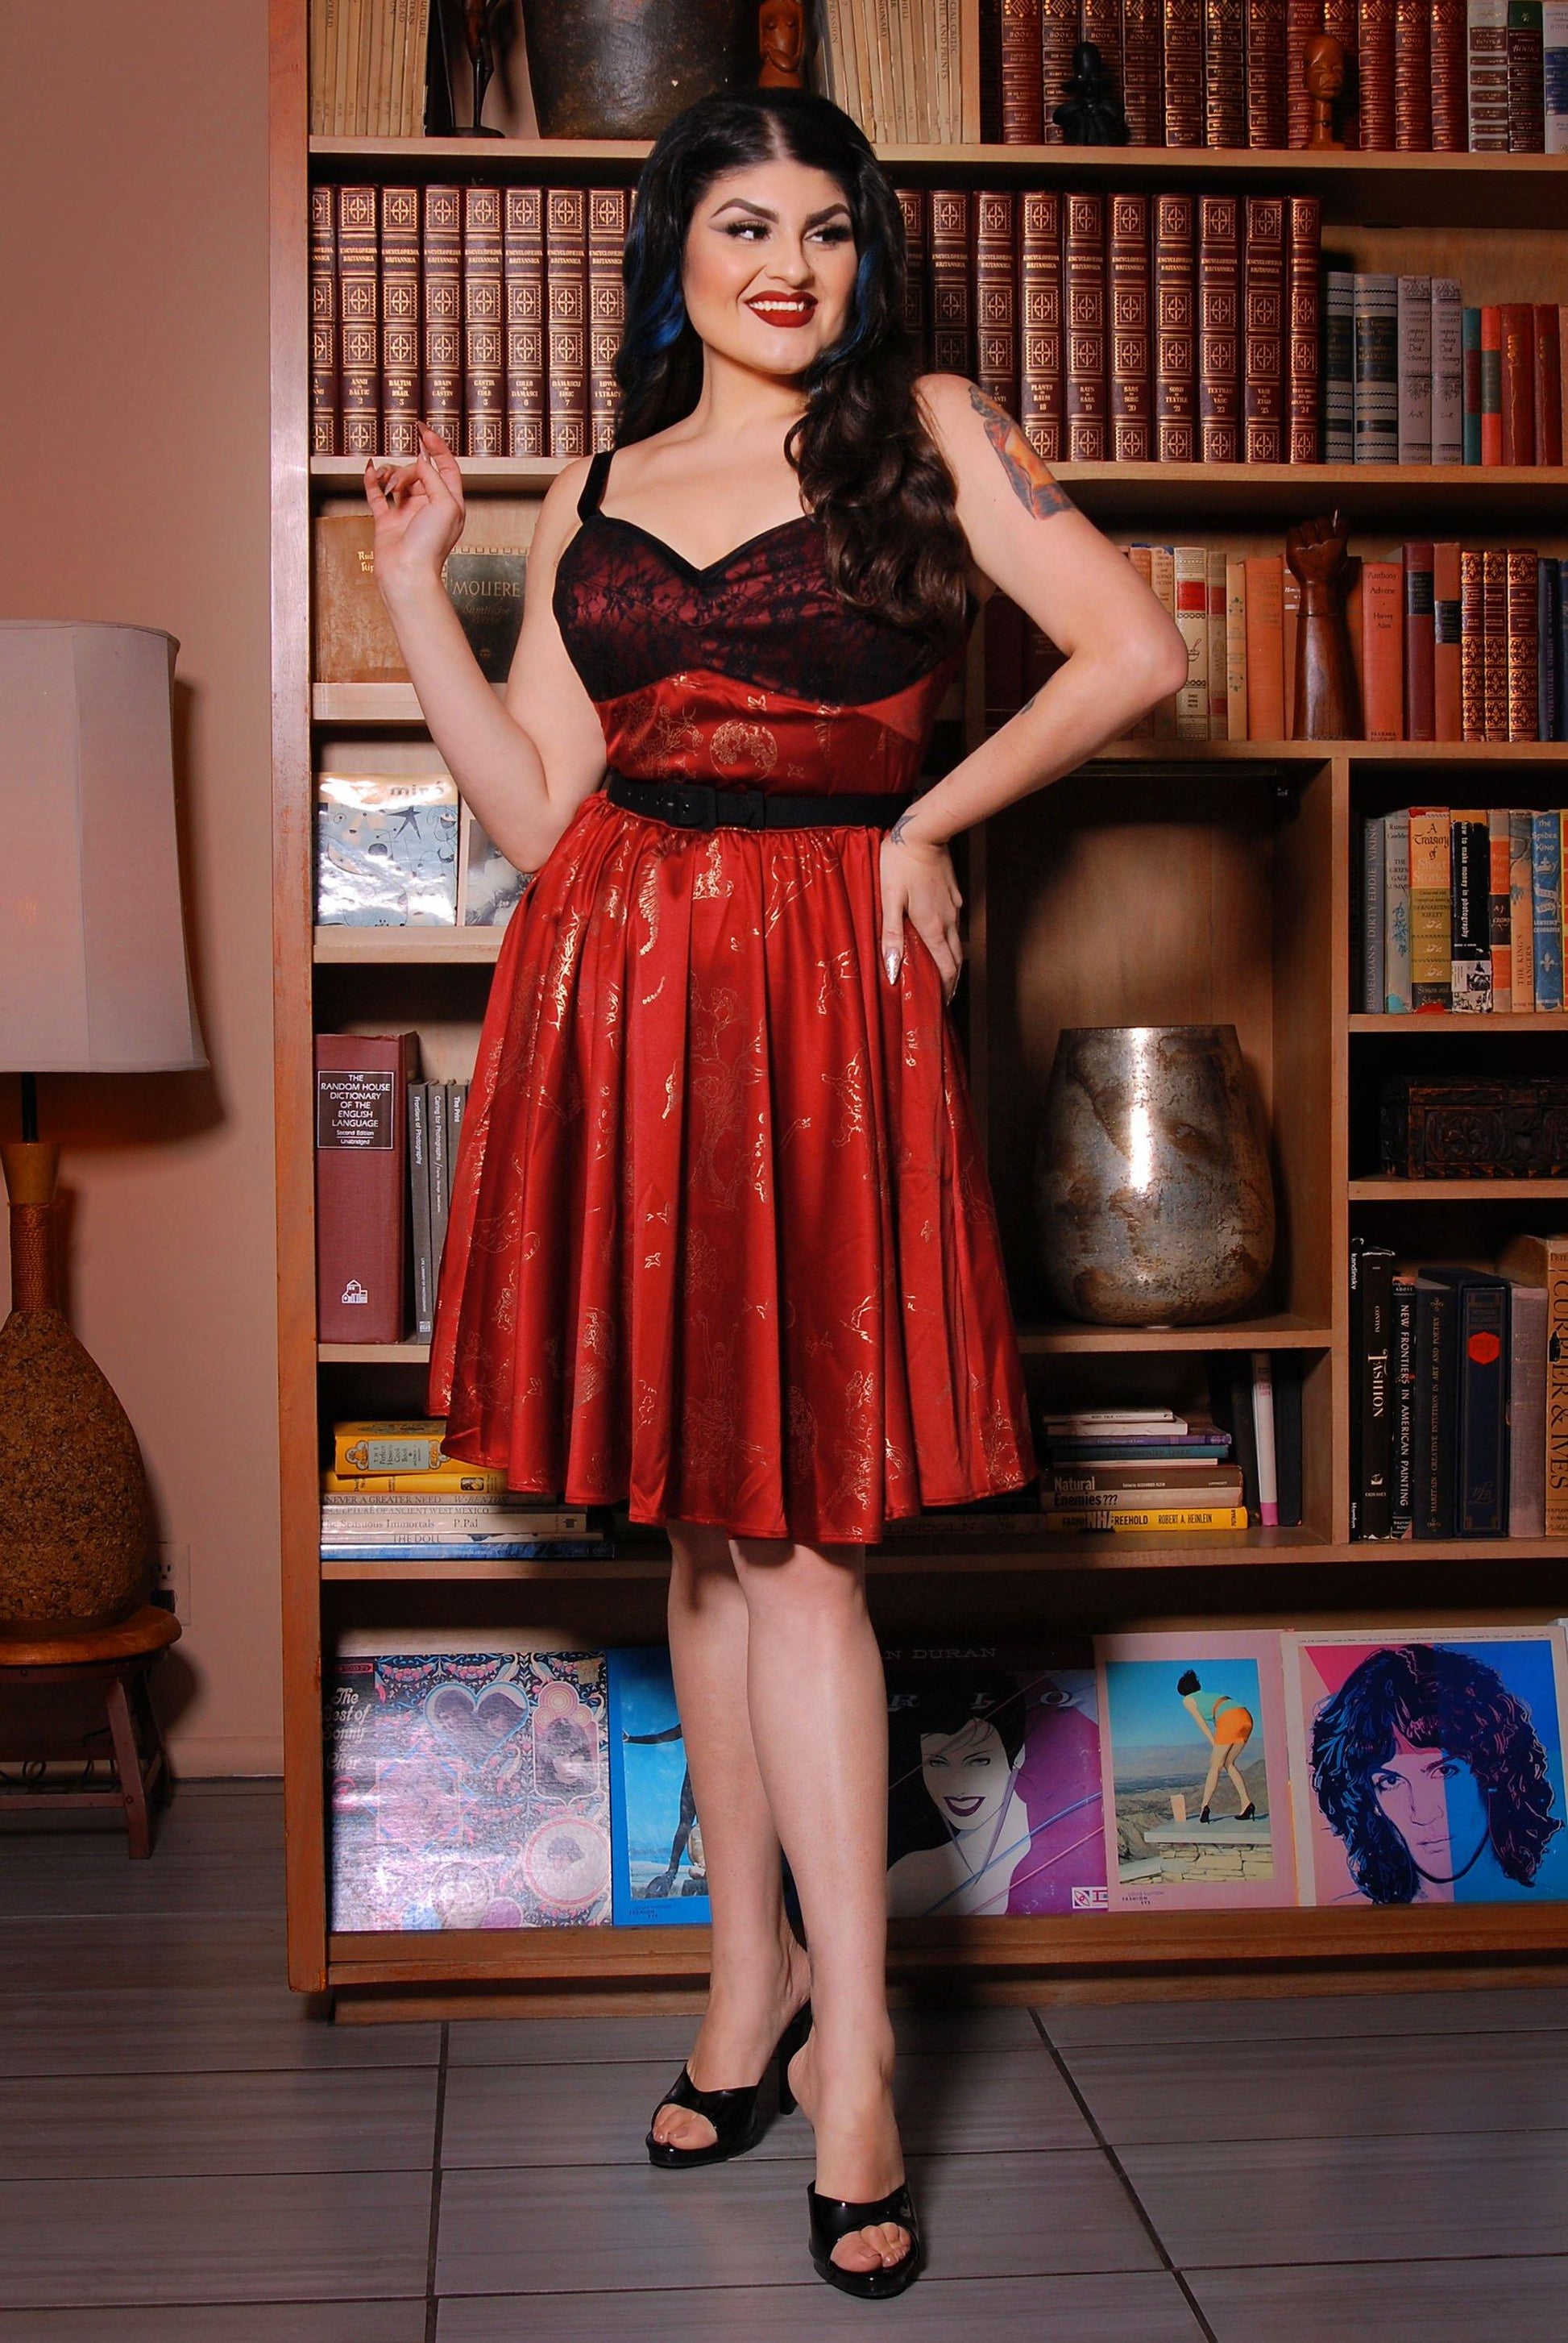 Final Sale - Courtney Vintage Swing Dress in Burgundy & Gold Witchy Toile Satin | Pinup Couture - pinupgirlclothing.com